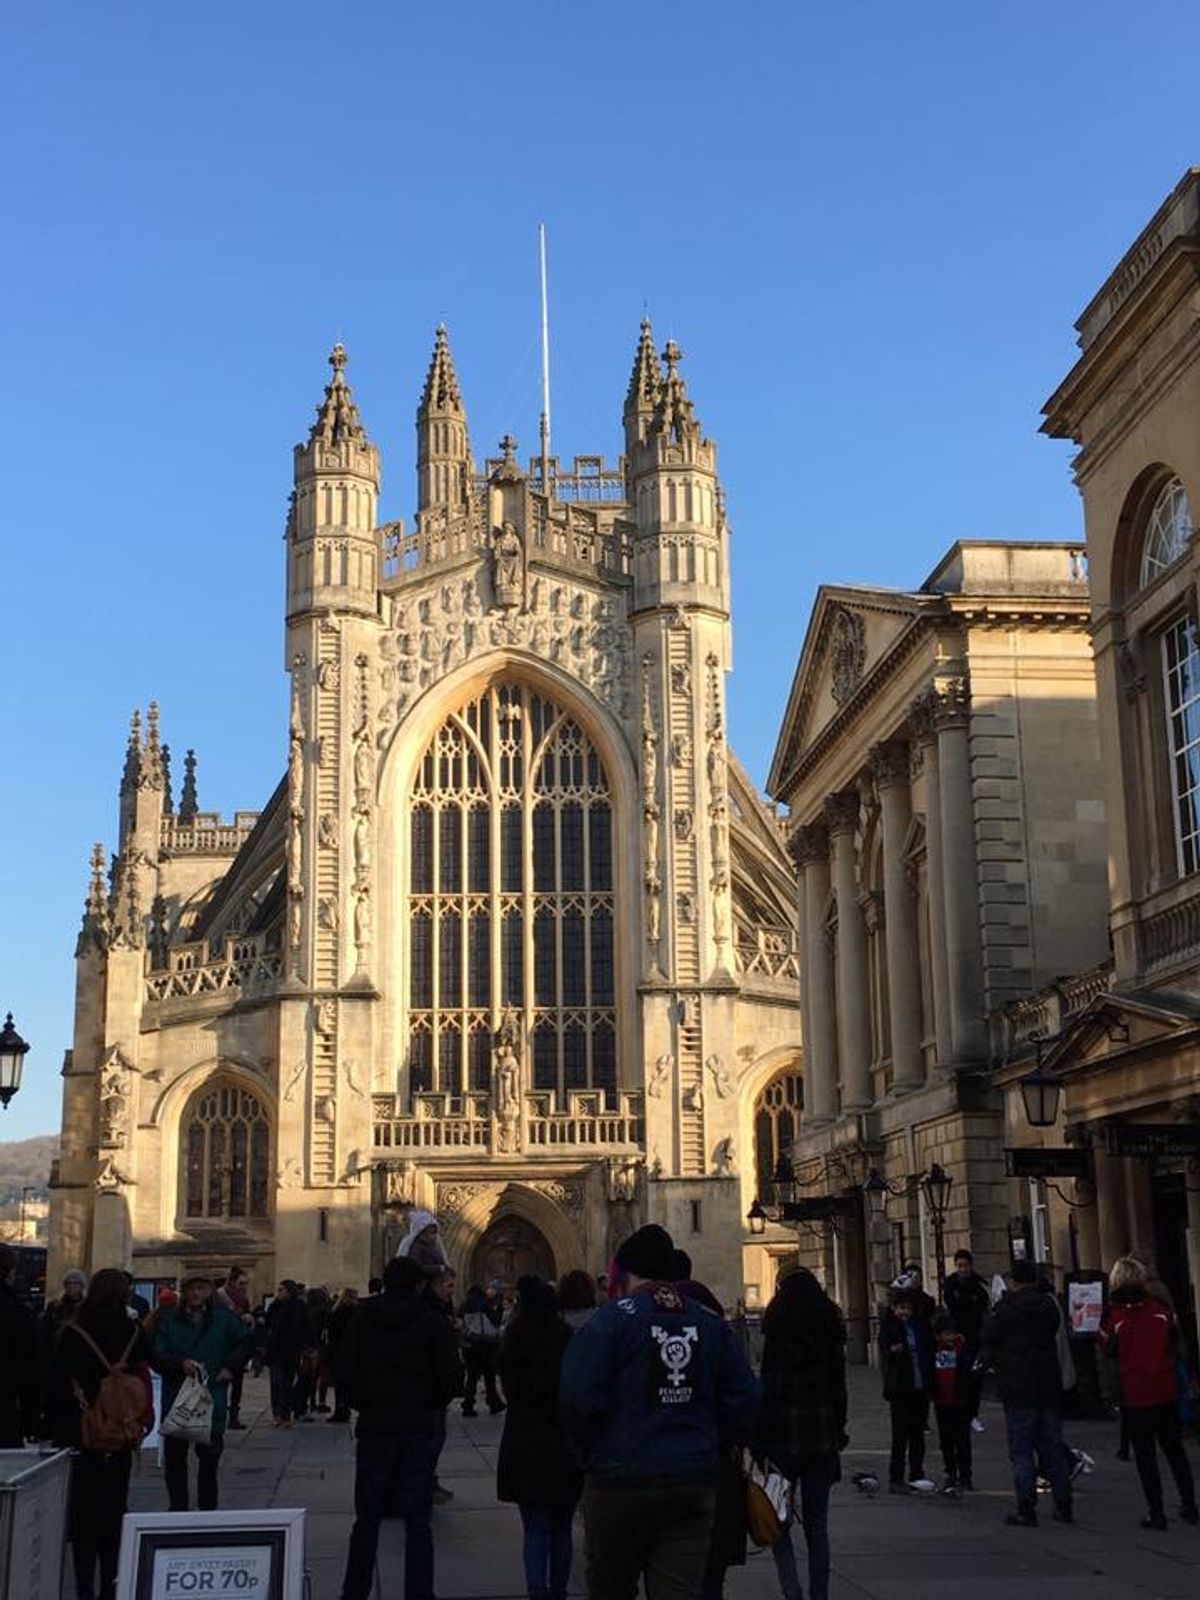 If You Have The Chance, Go To Bath